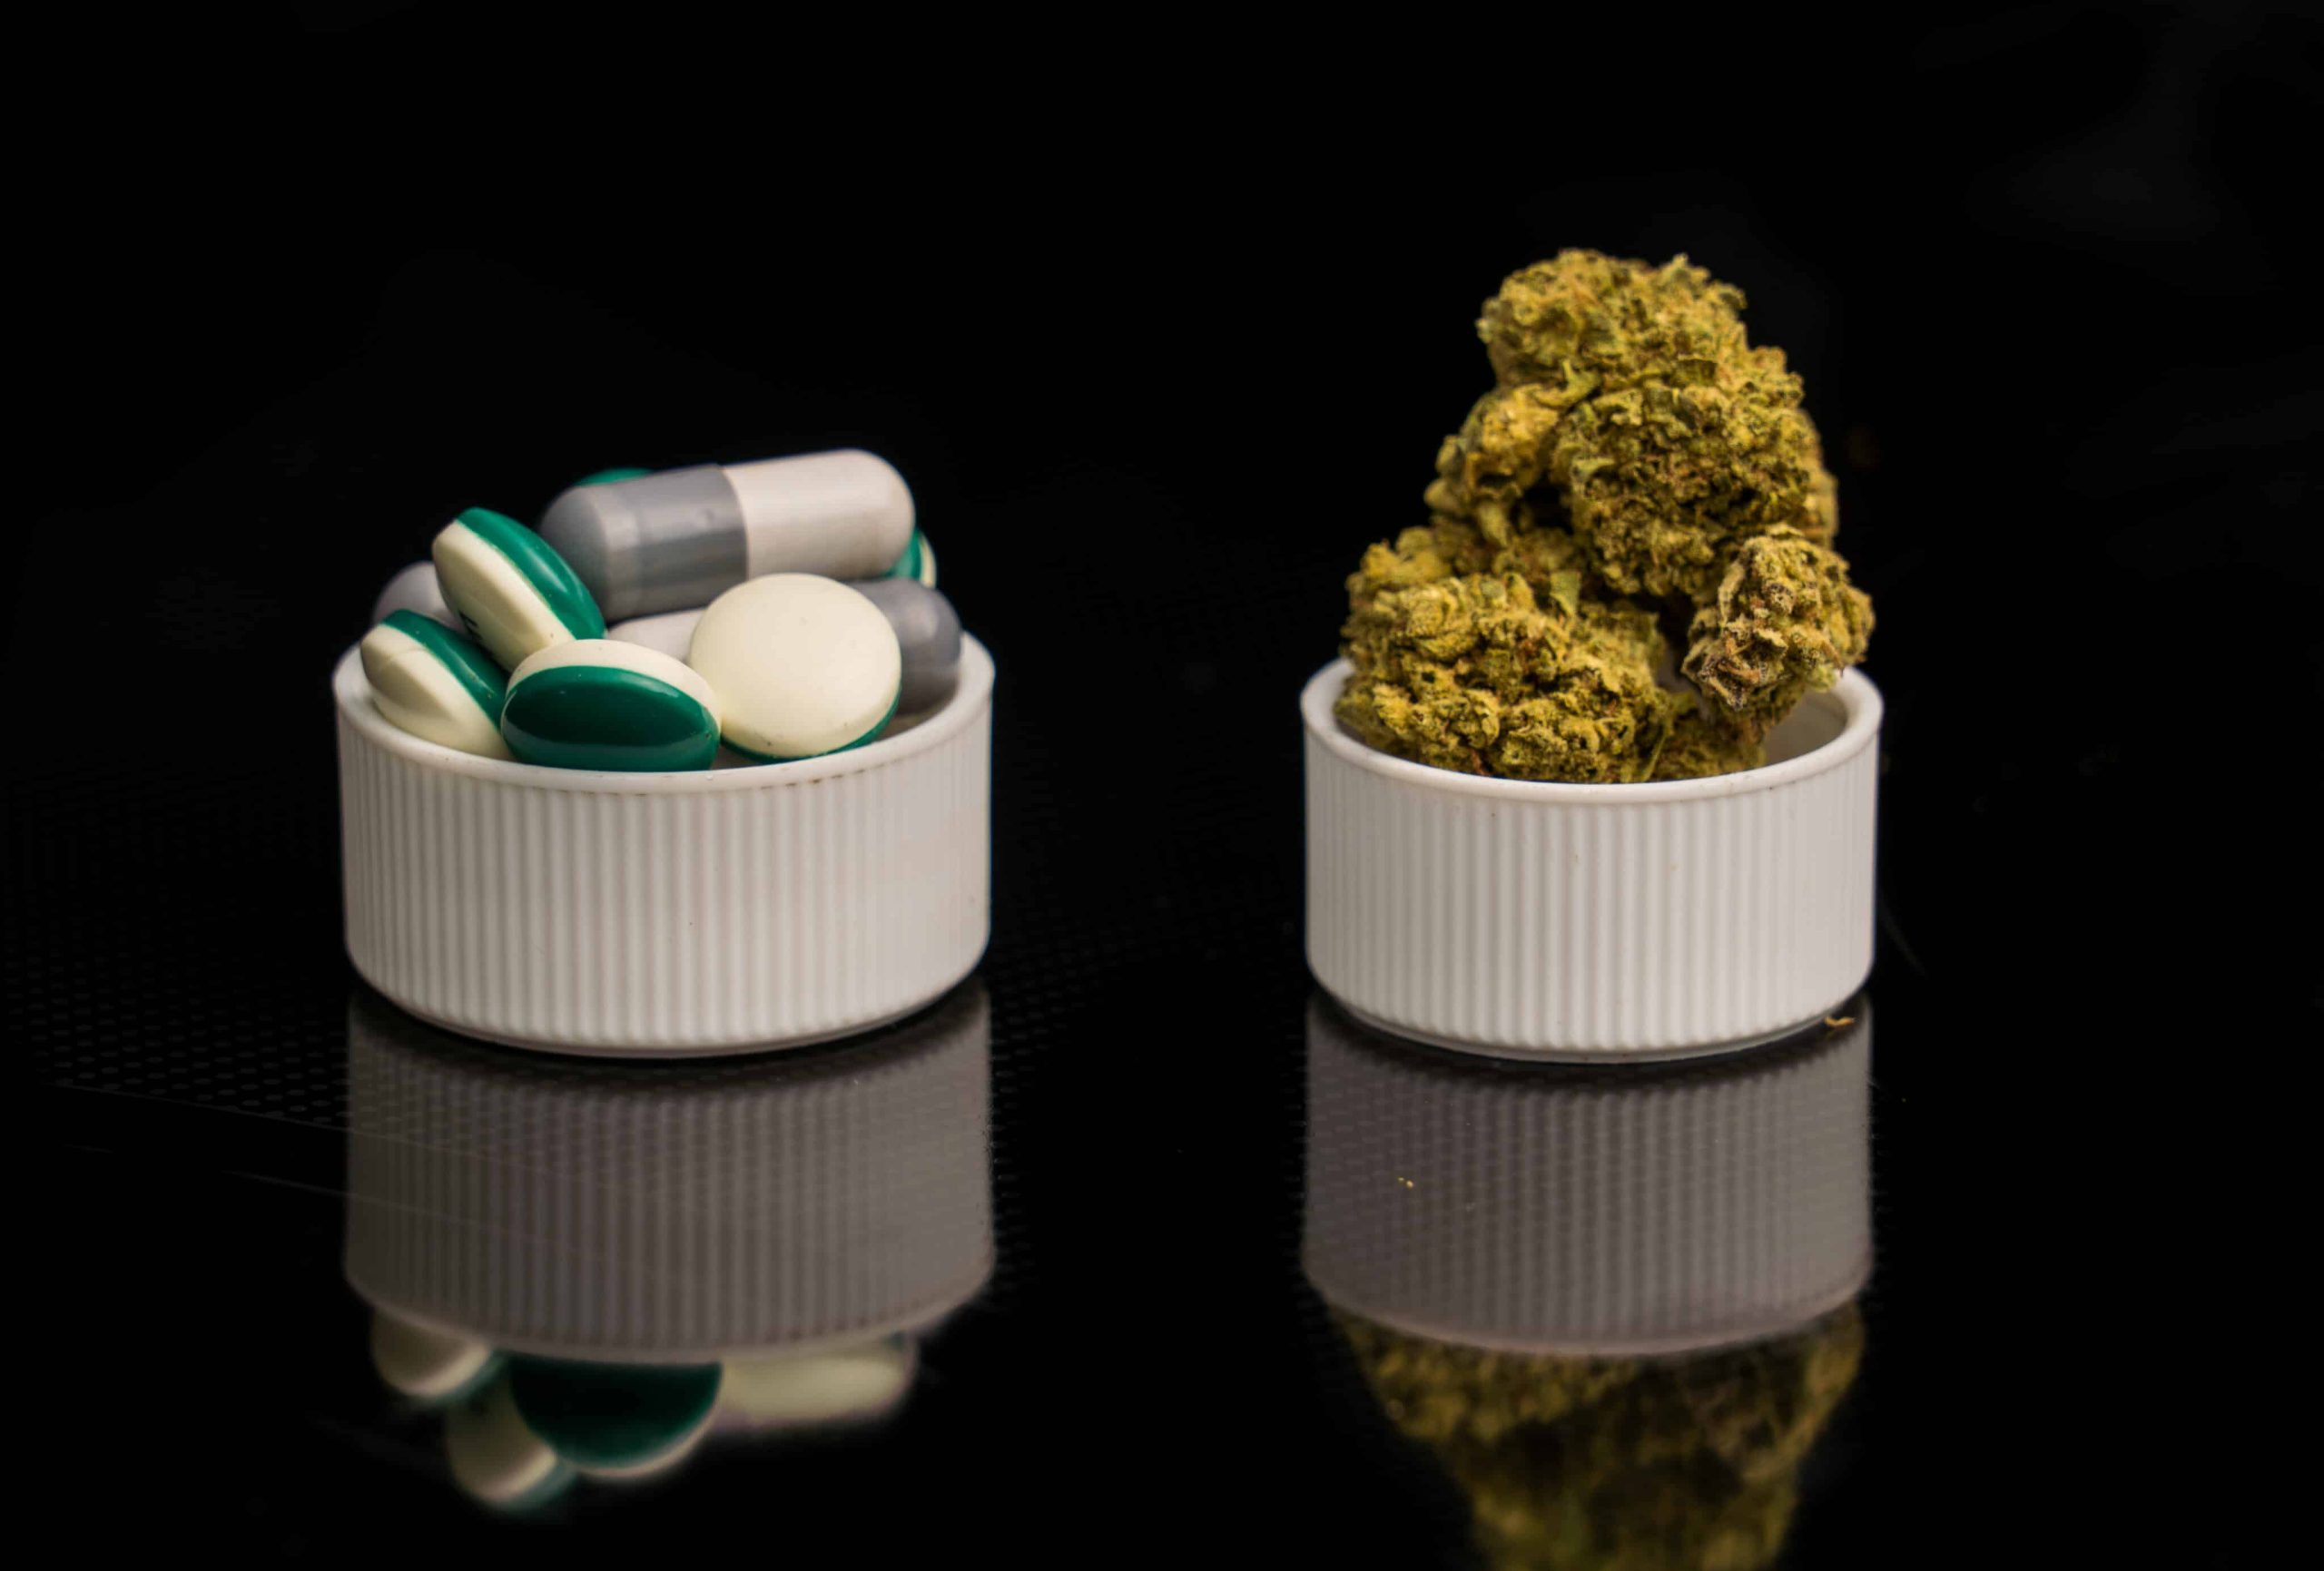 New Study Suggests Cannabis Does Not Help Opioid Use Disorder